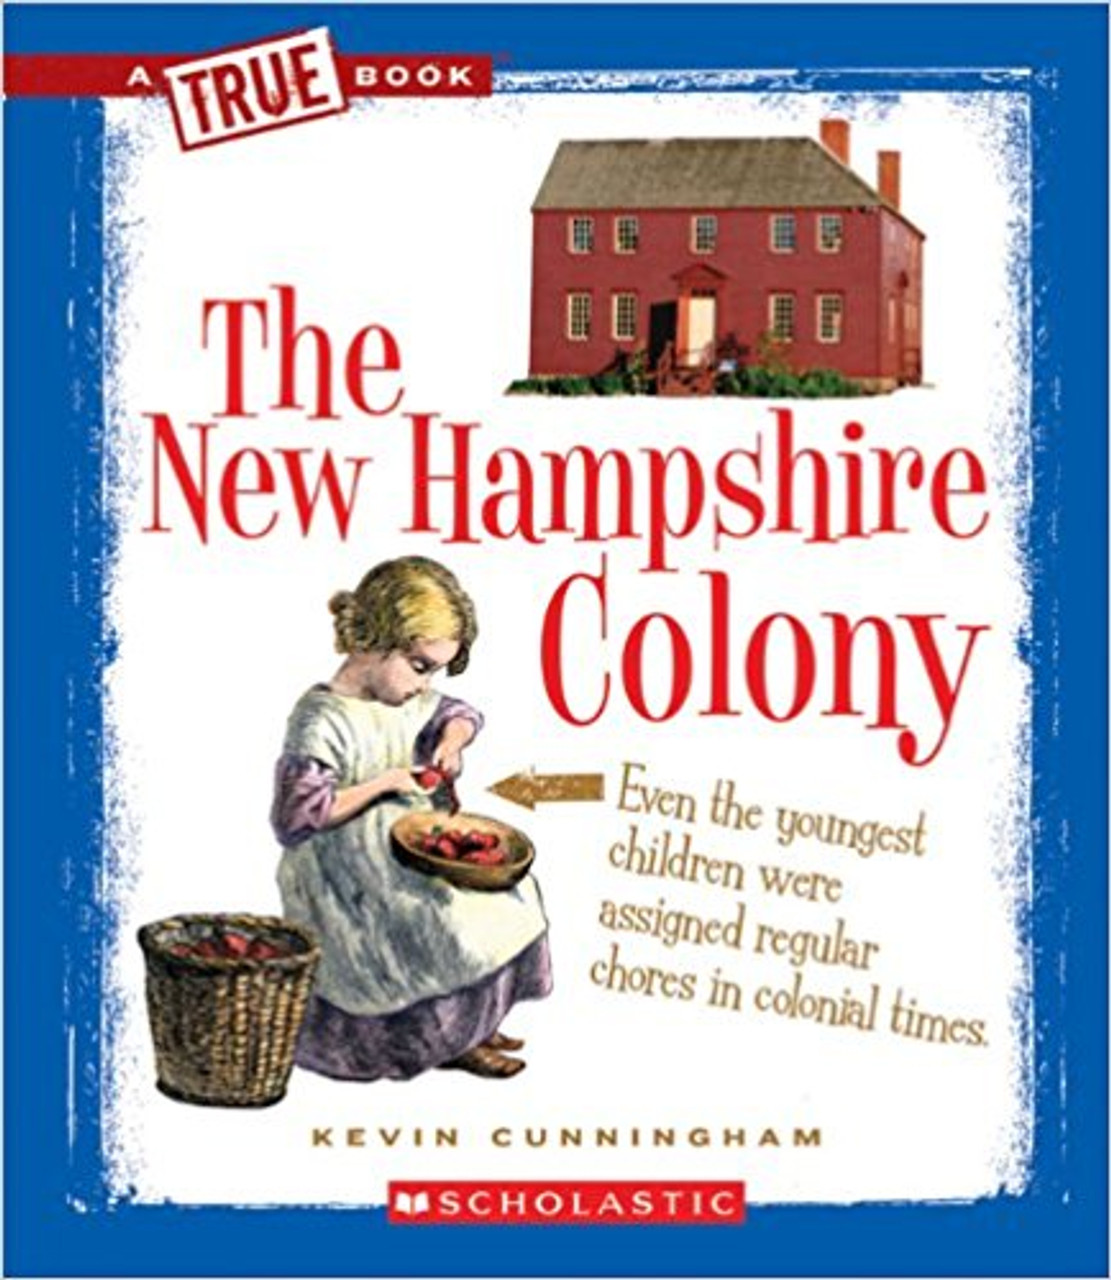 The New Hampshire Colony by Kevin Cunningham